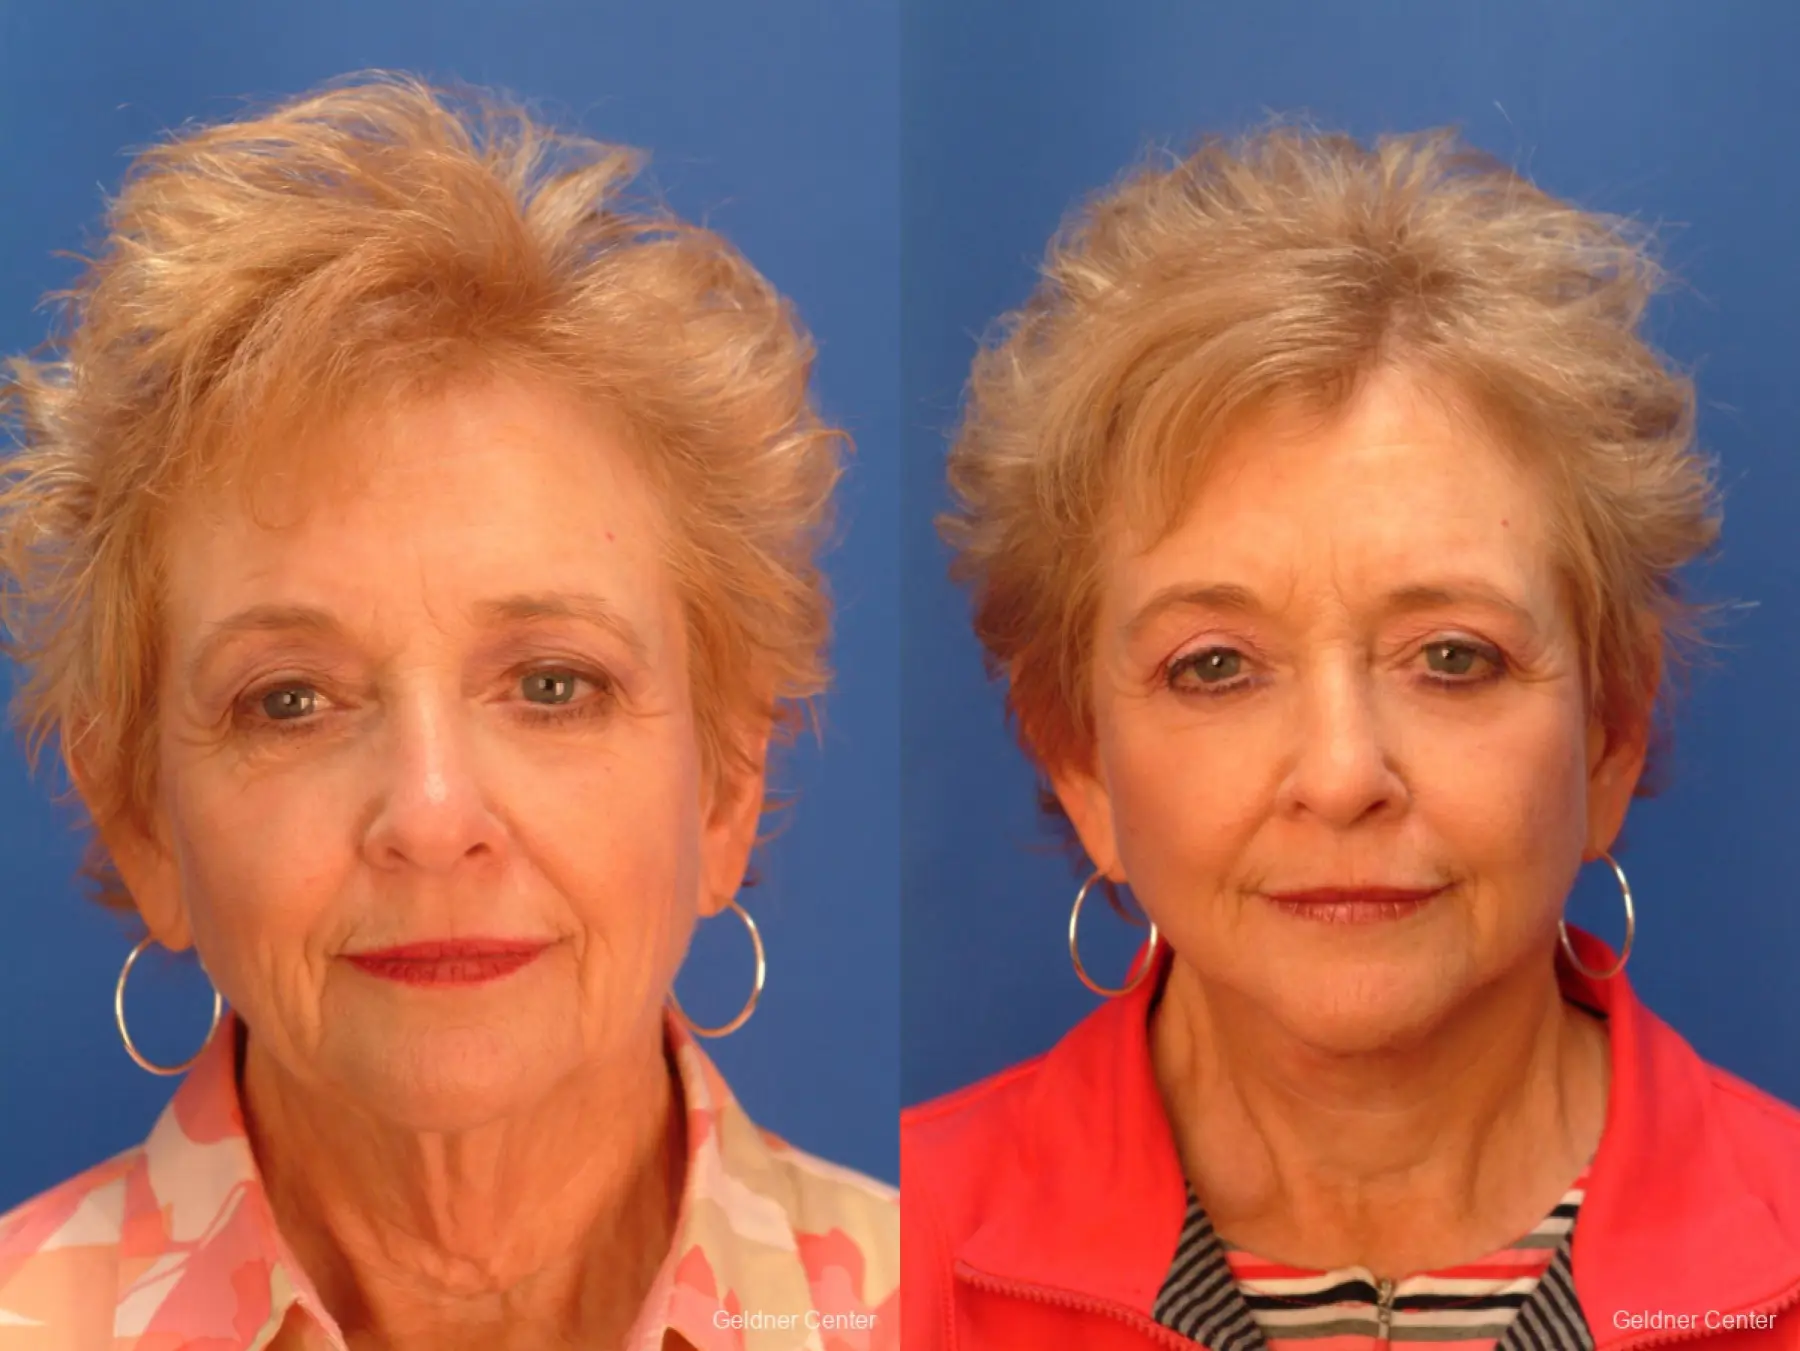 Neck Lift: Patient 5 - Before and After 1